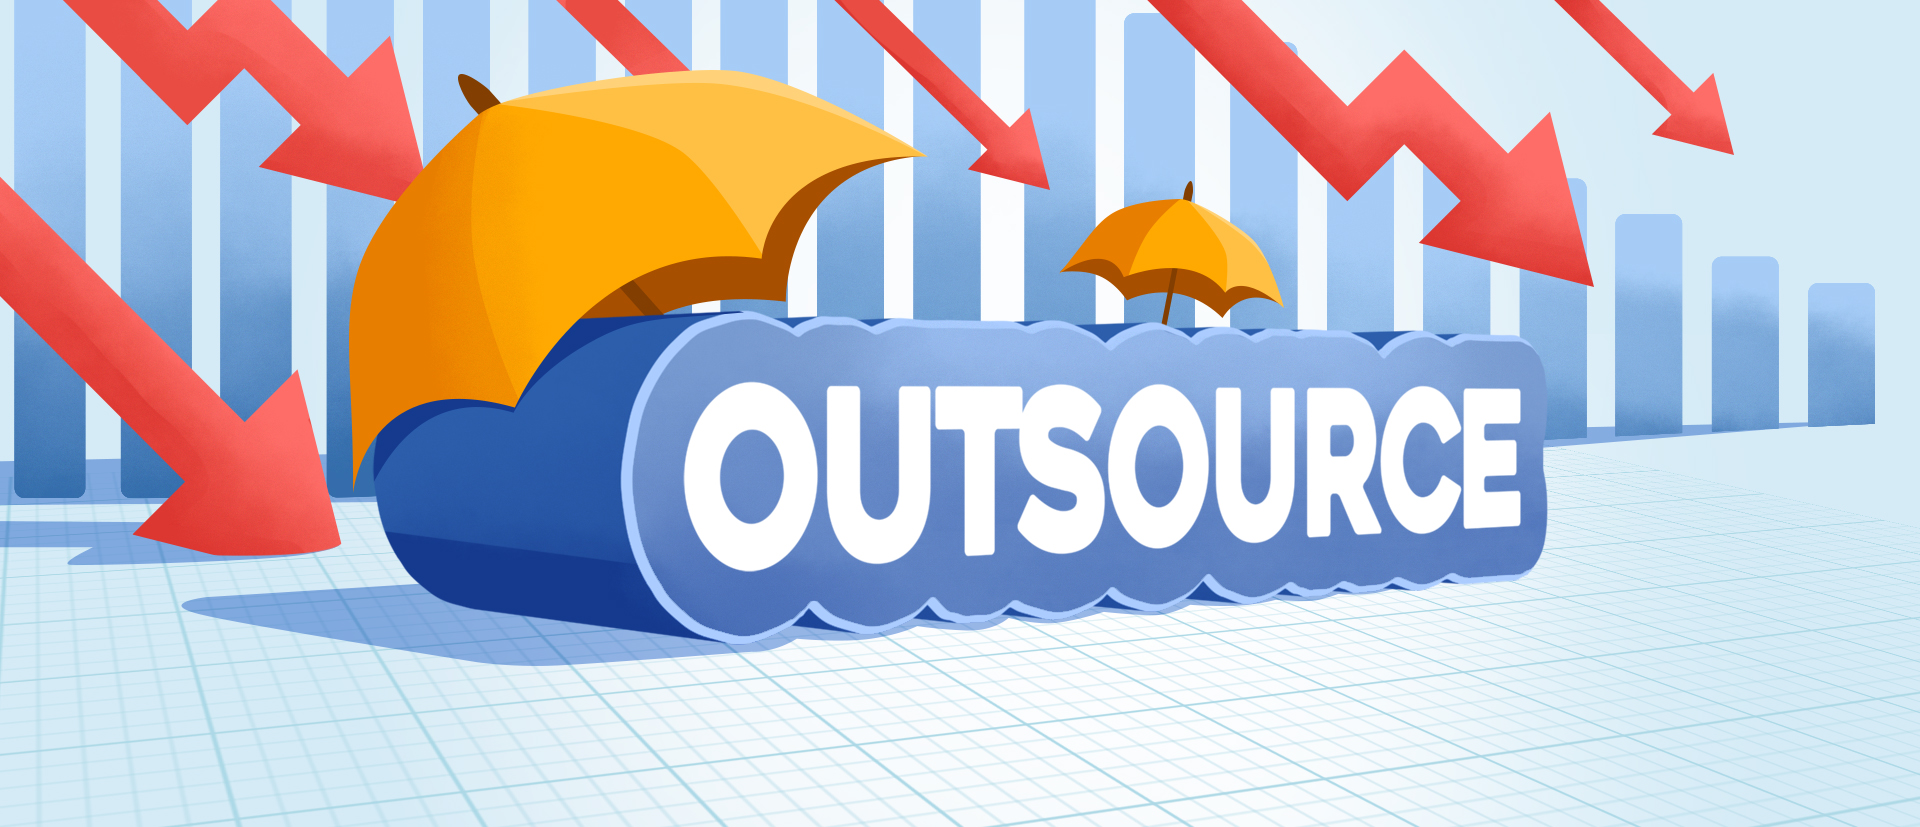 5 Reasons for Sales Outsourcing in a Recession - Salaria Sales Solutions